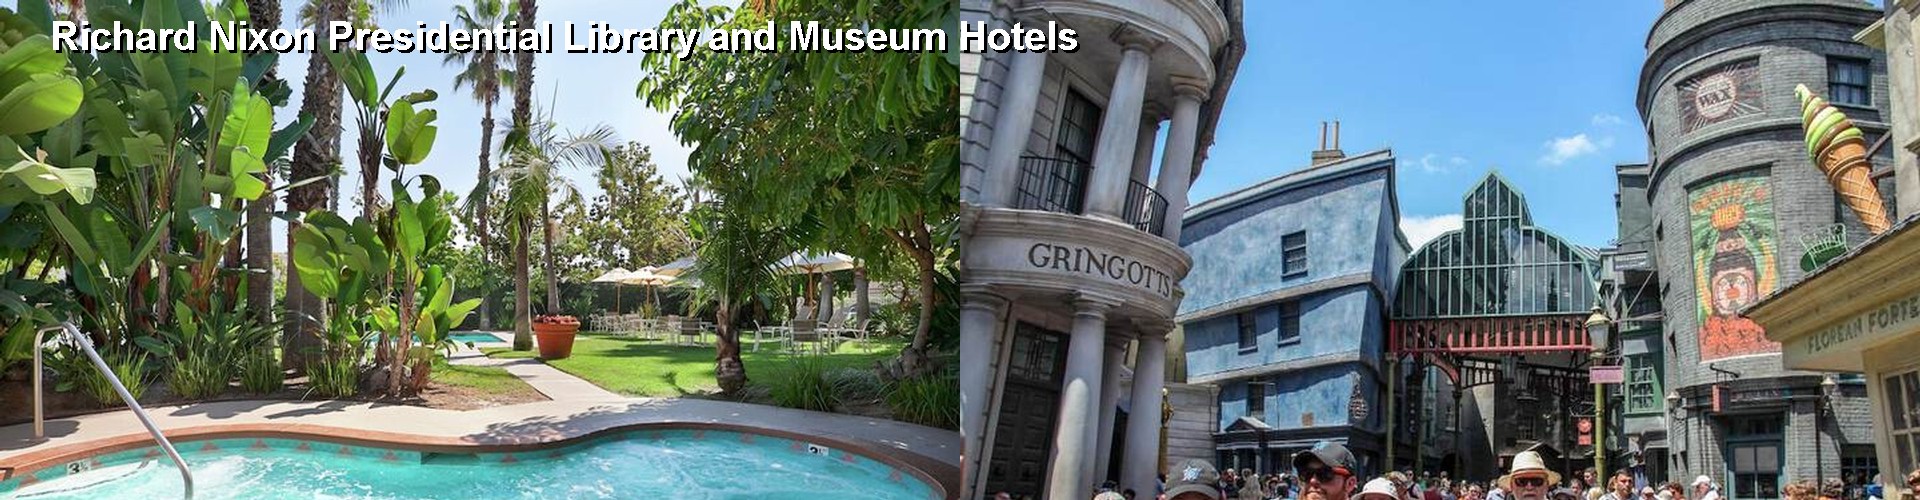 4 Best Hotels near Richard Nixon Presidential Library and Museum